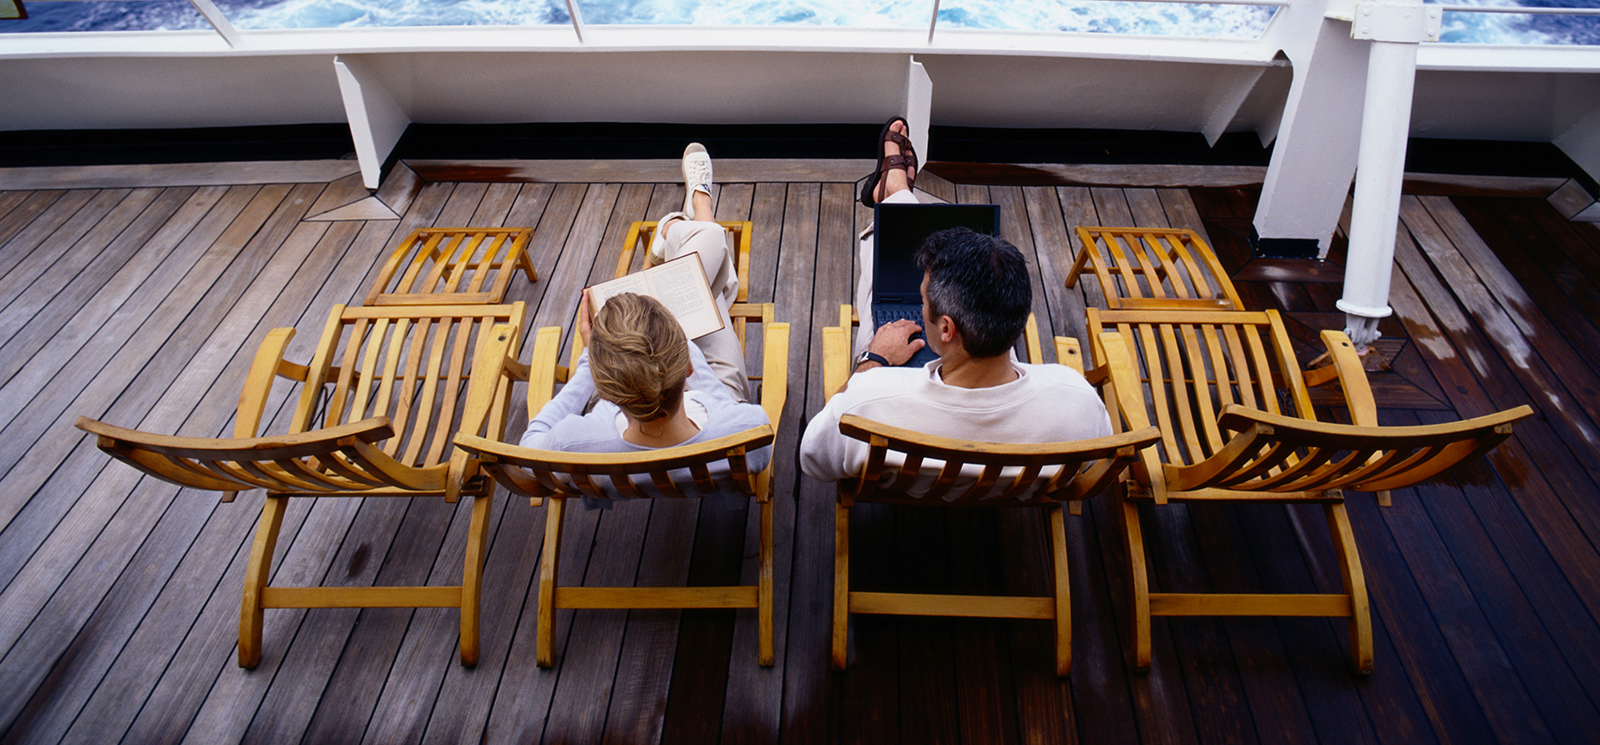 IMAGE: Couple sitting in deck chairs on cruise ship